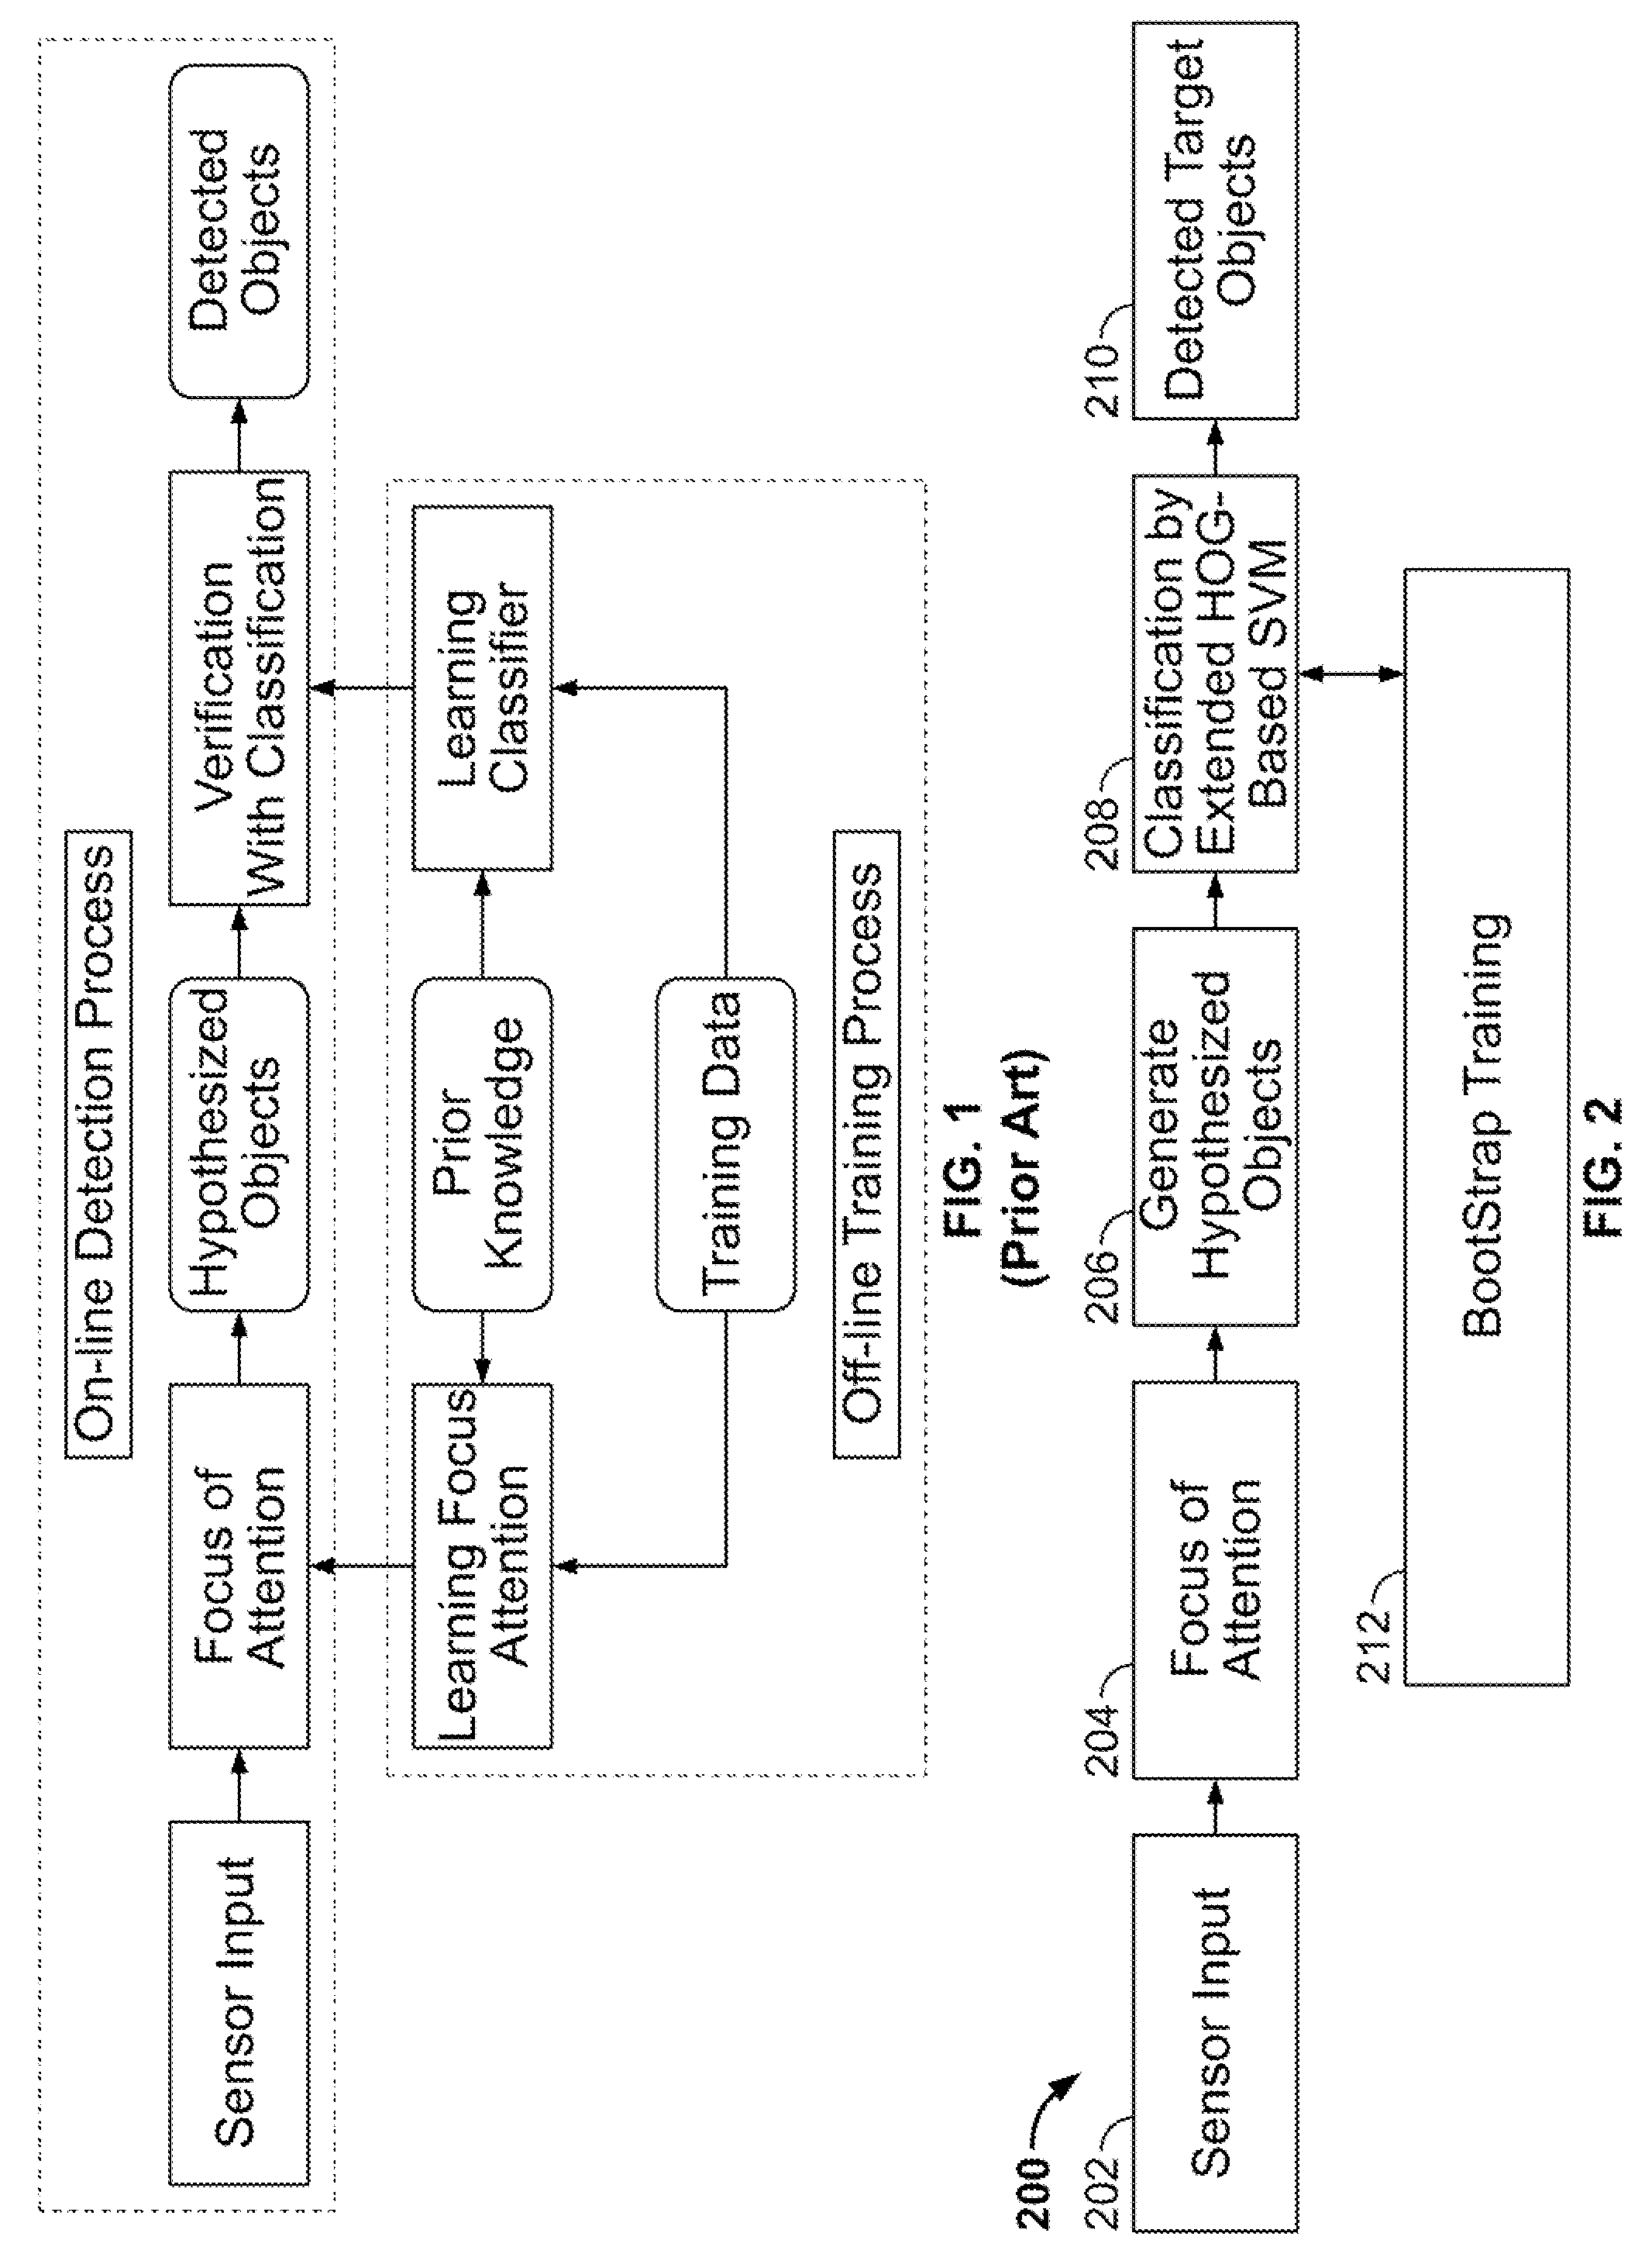 System and method for detecting still objects in images